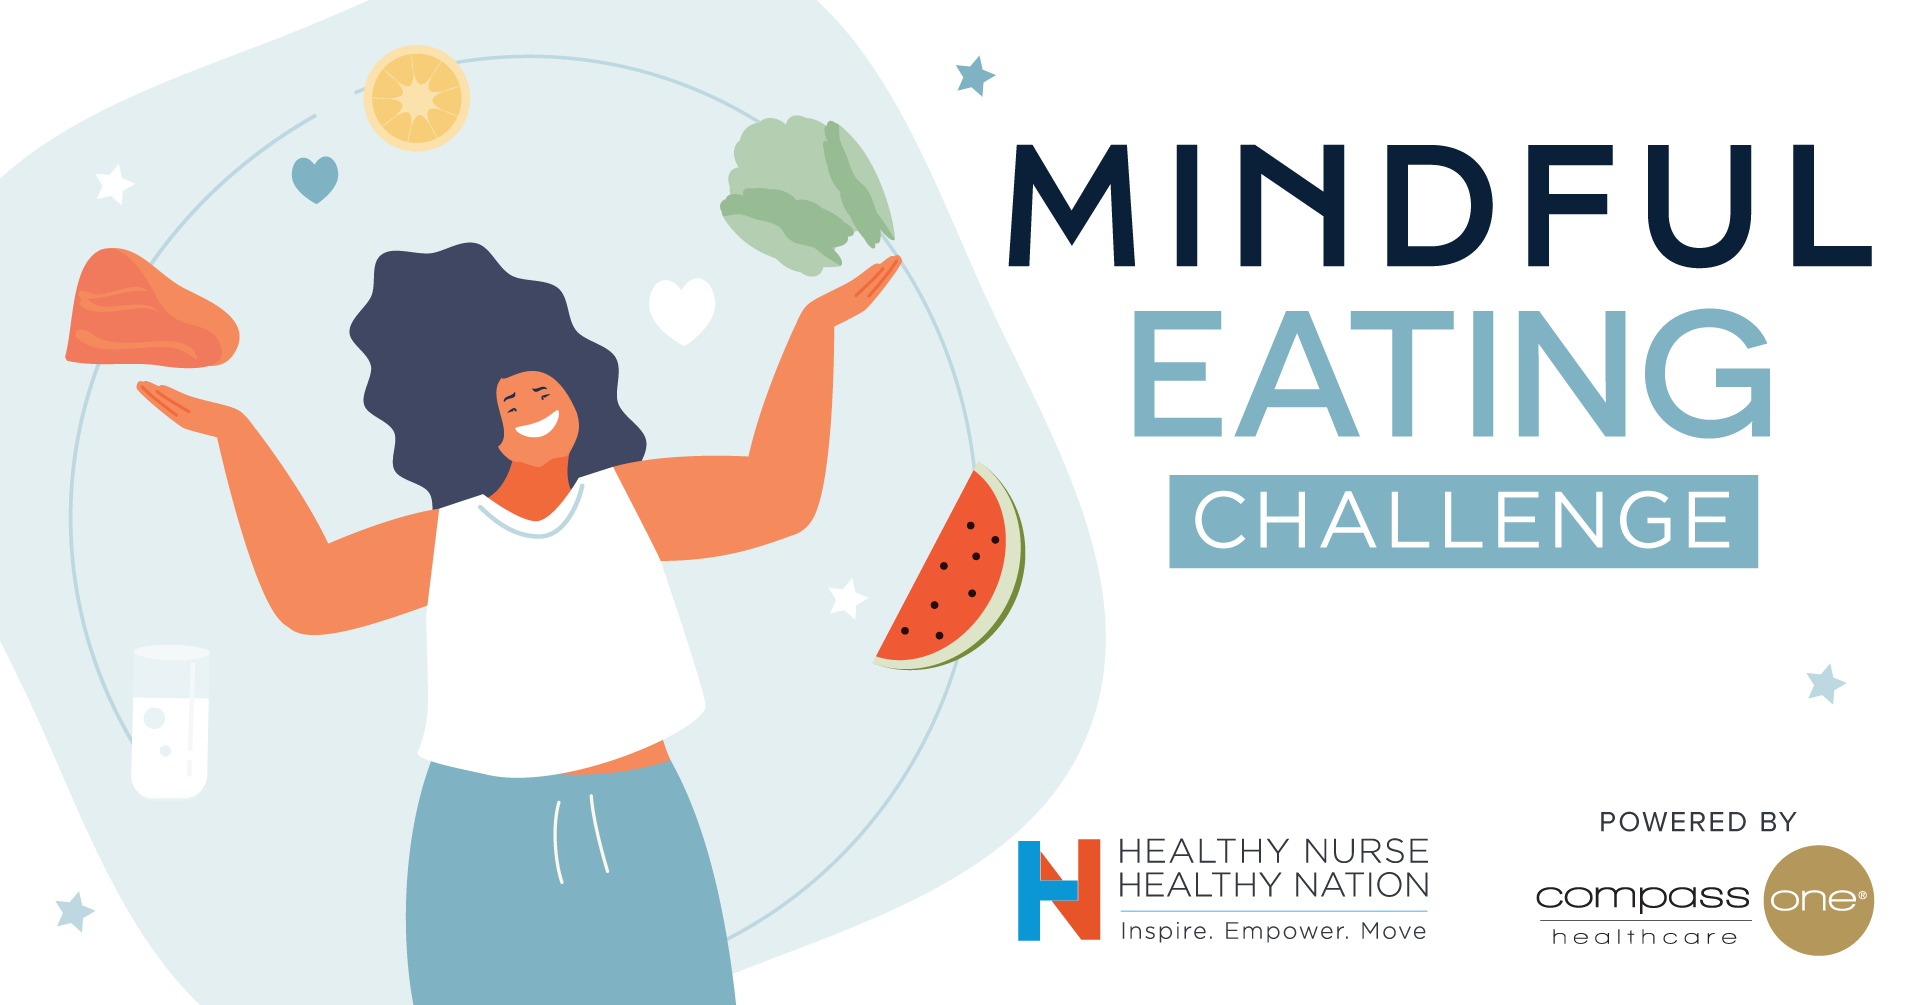 Cultivate Culinary Appreciation - Mindful Eating, powered by Morrison Healthcare, a Division of Compass One Healthcare - Day 4 Tip 4684